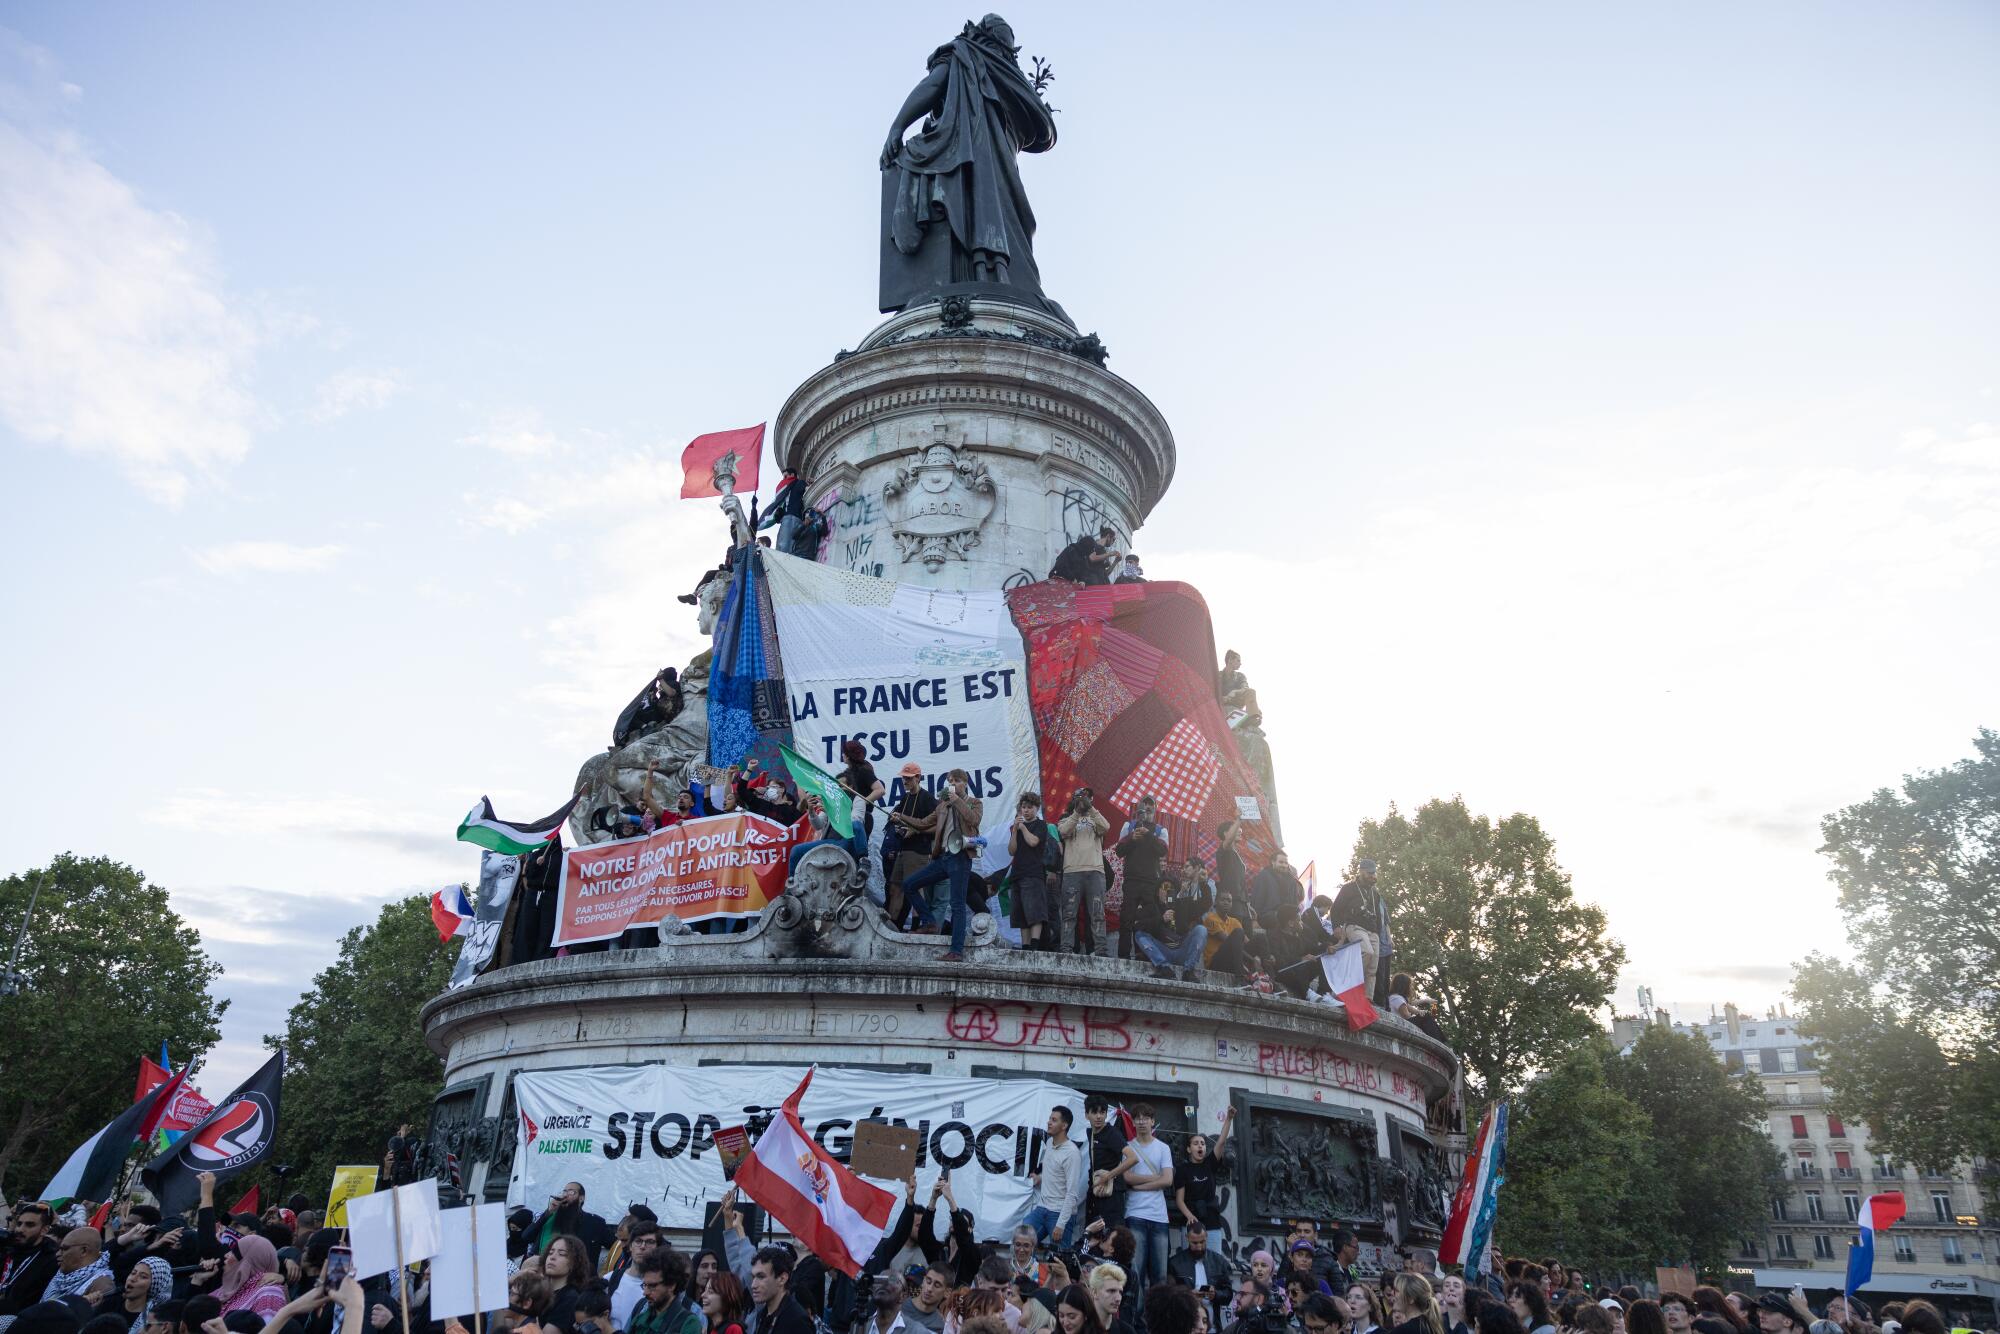 Supporters of the left wing union, New Popular Front, gather during a protest at the Place de la Republique.